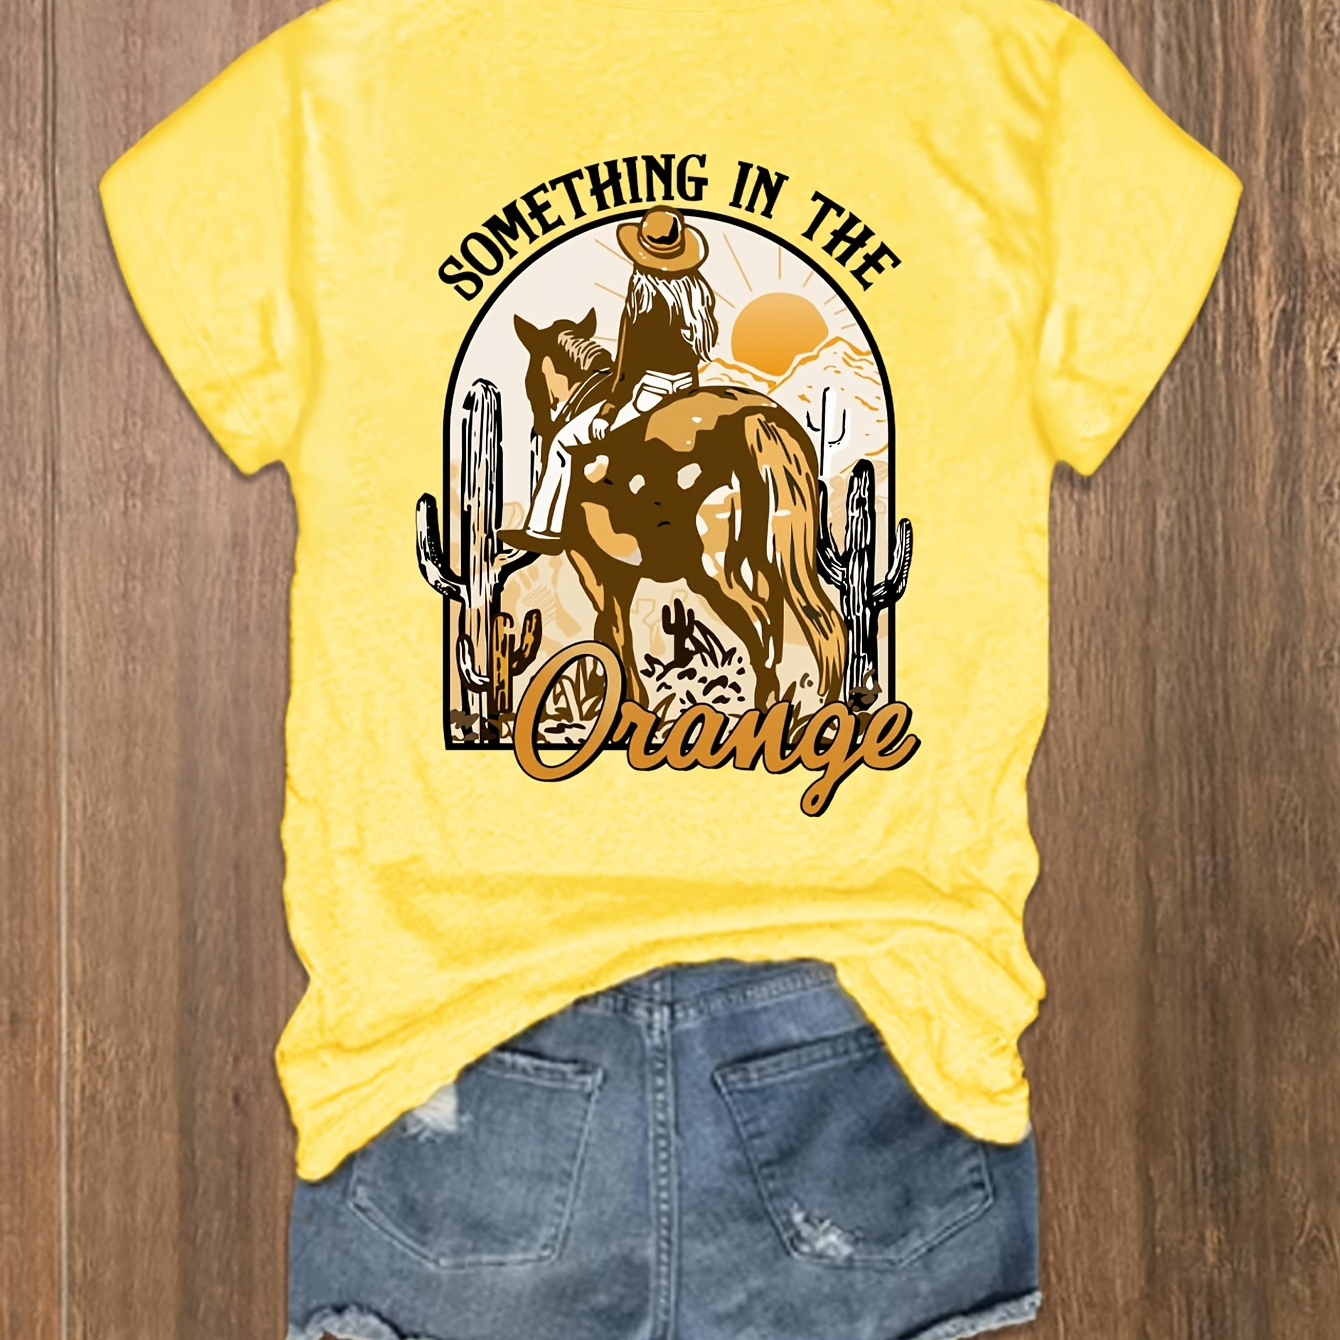 

Western Cowgirl Print T-shirt, Vintage Short Sleeve Crew Neck Top, Women's Clothing